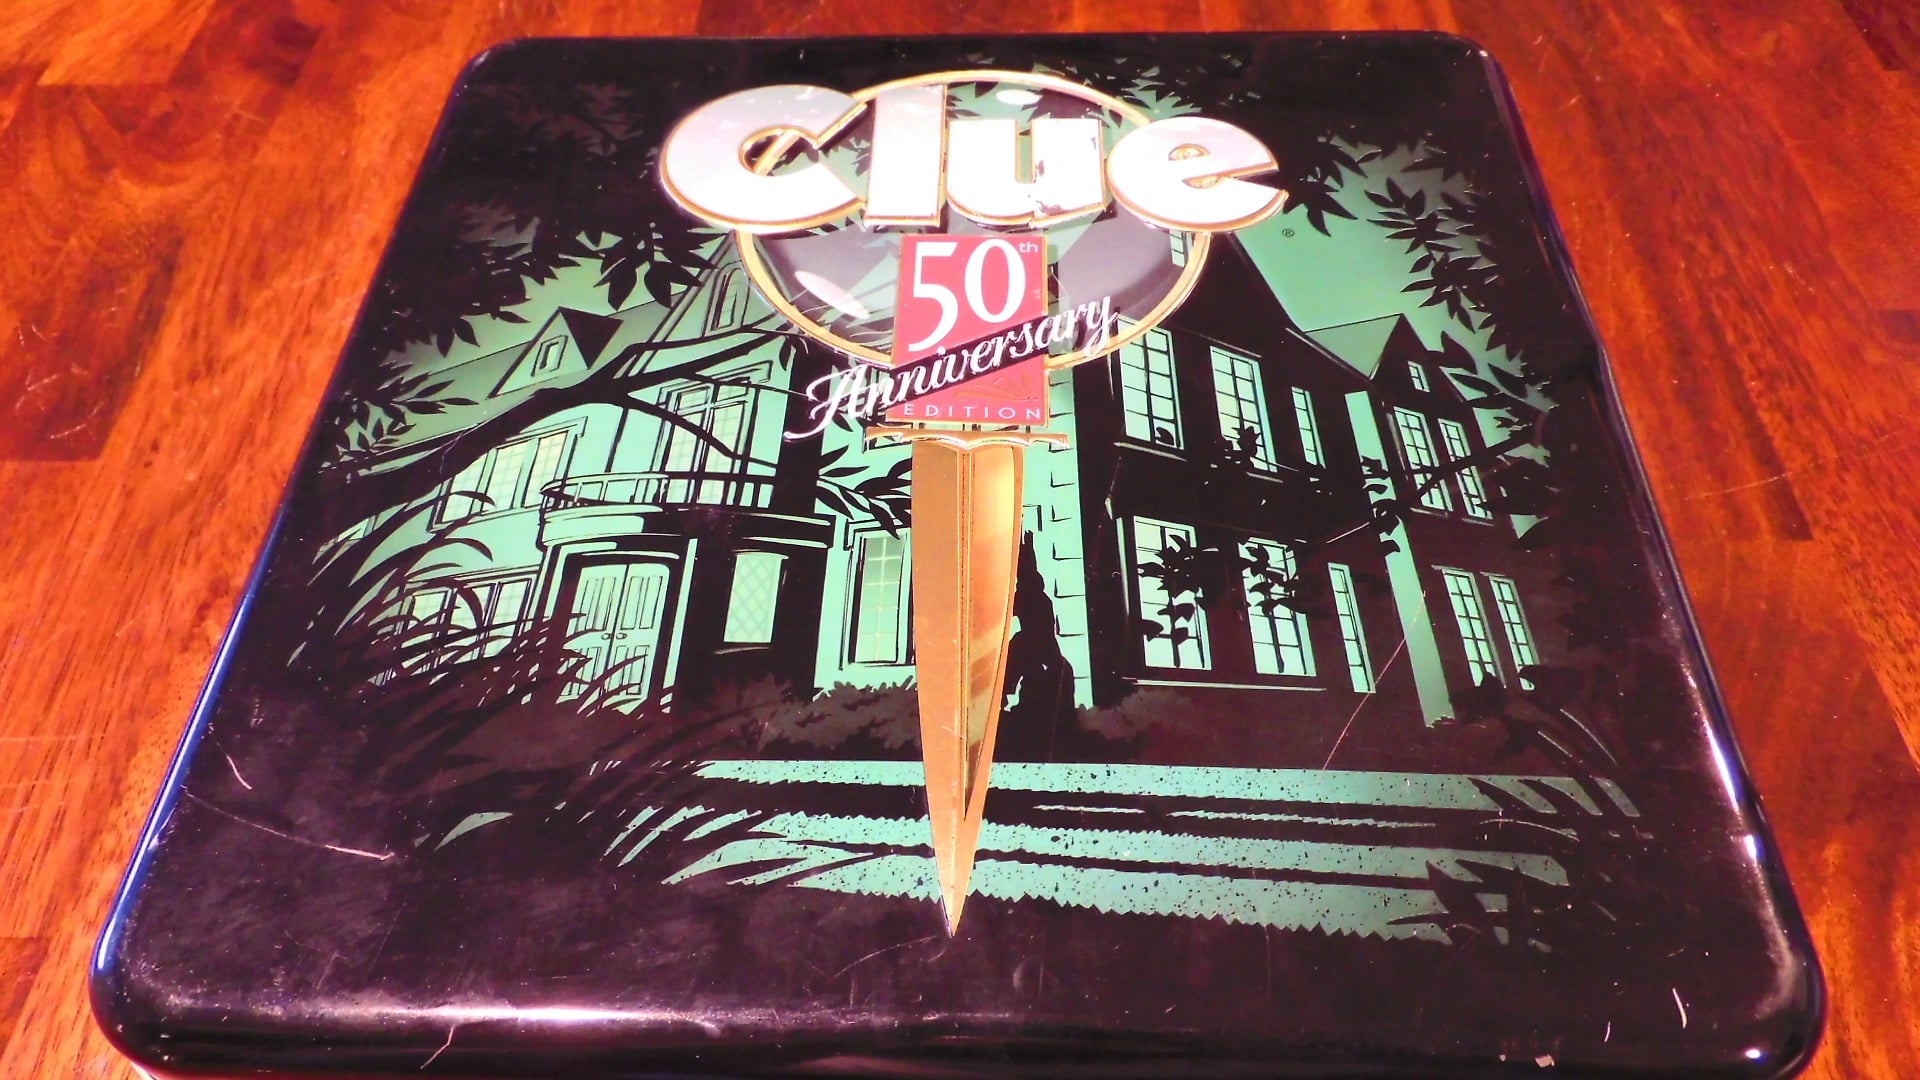 A closeup of the box cover for the 50th Anniversary Edition Of Clue.